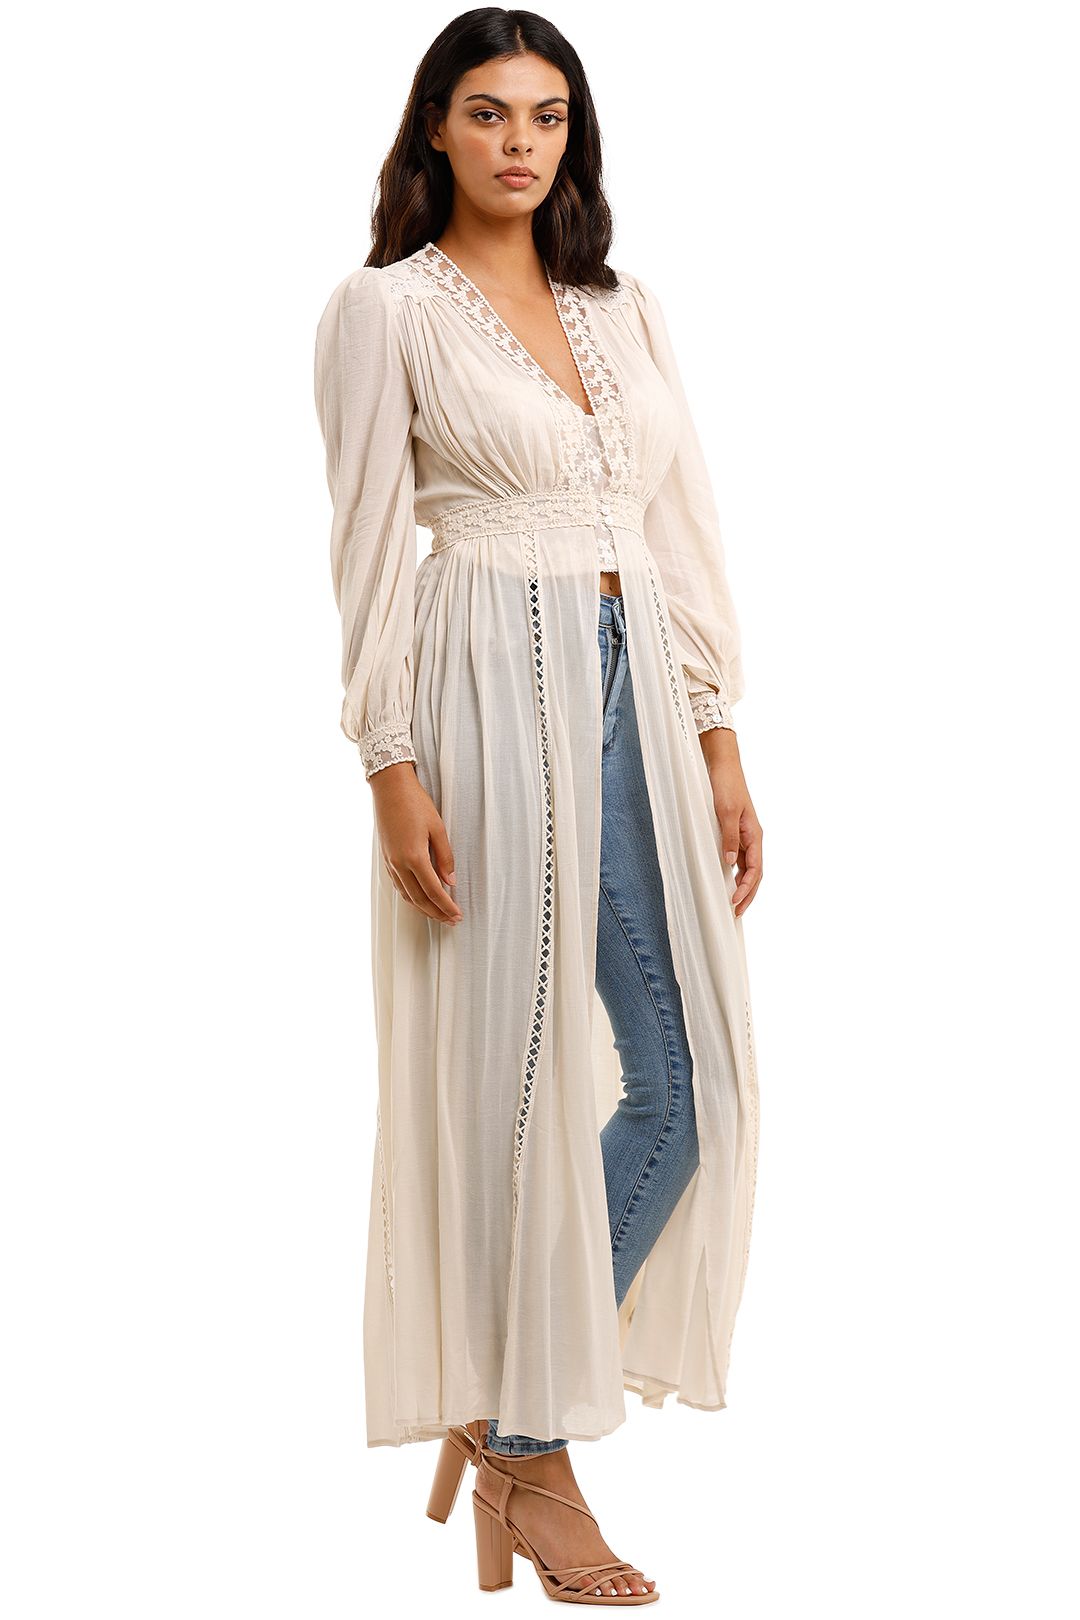 Spell Le Gauze Lace Duster Off White